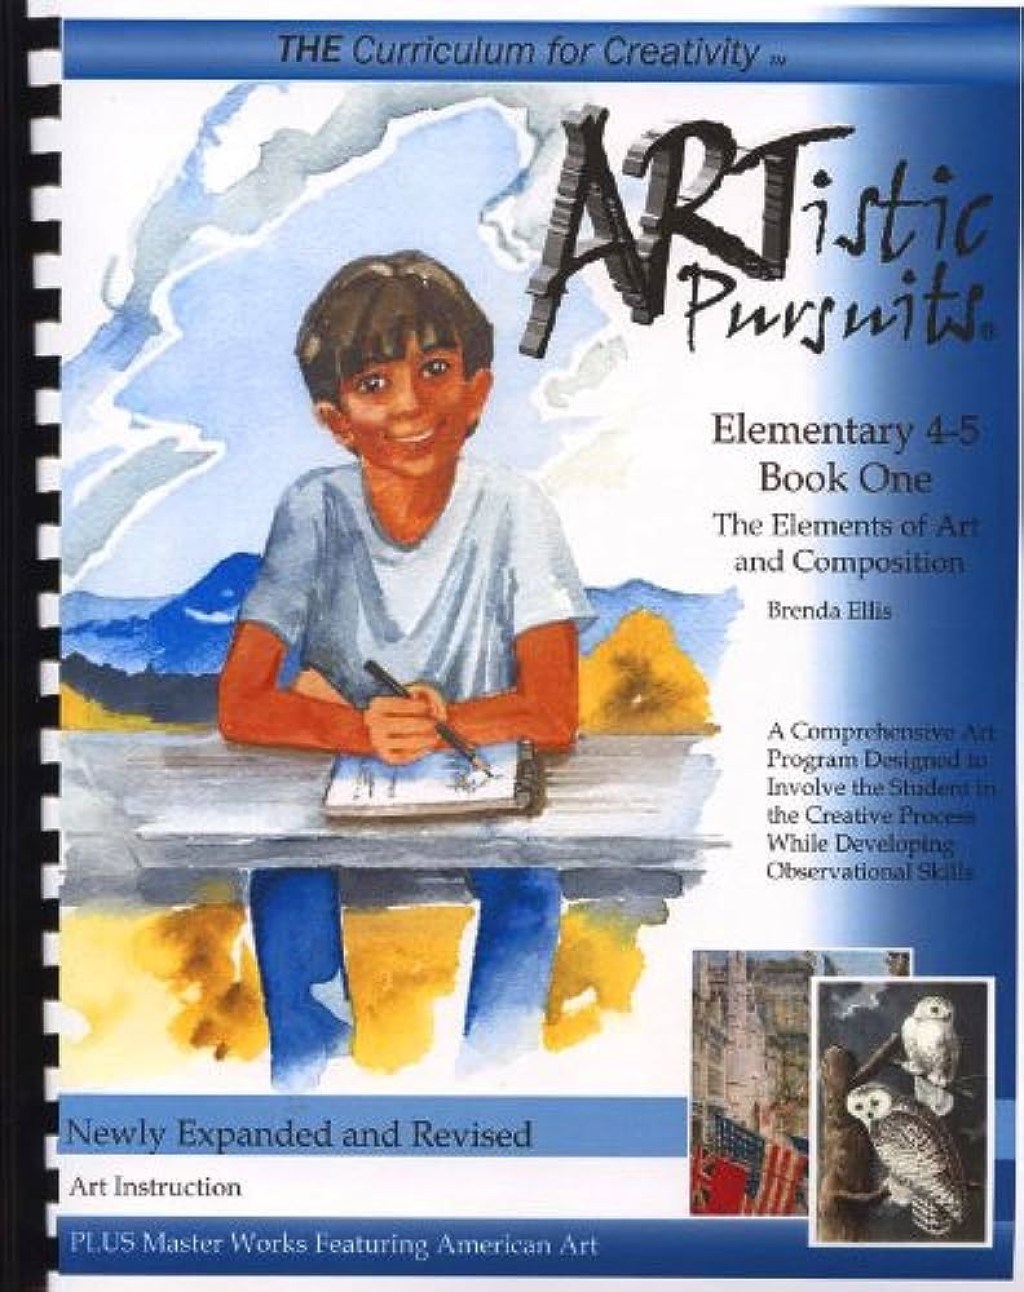 ARTistic Pursuits Elementary - Book One, The Elements of Art and